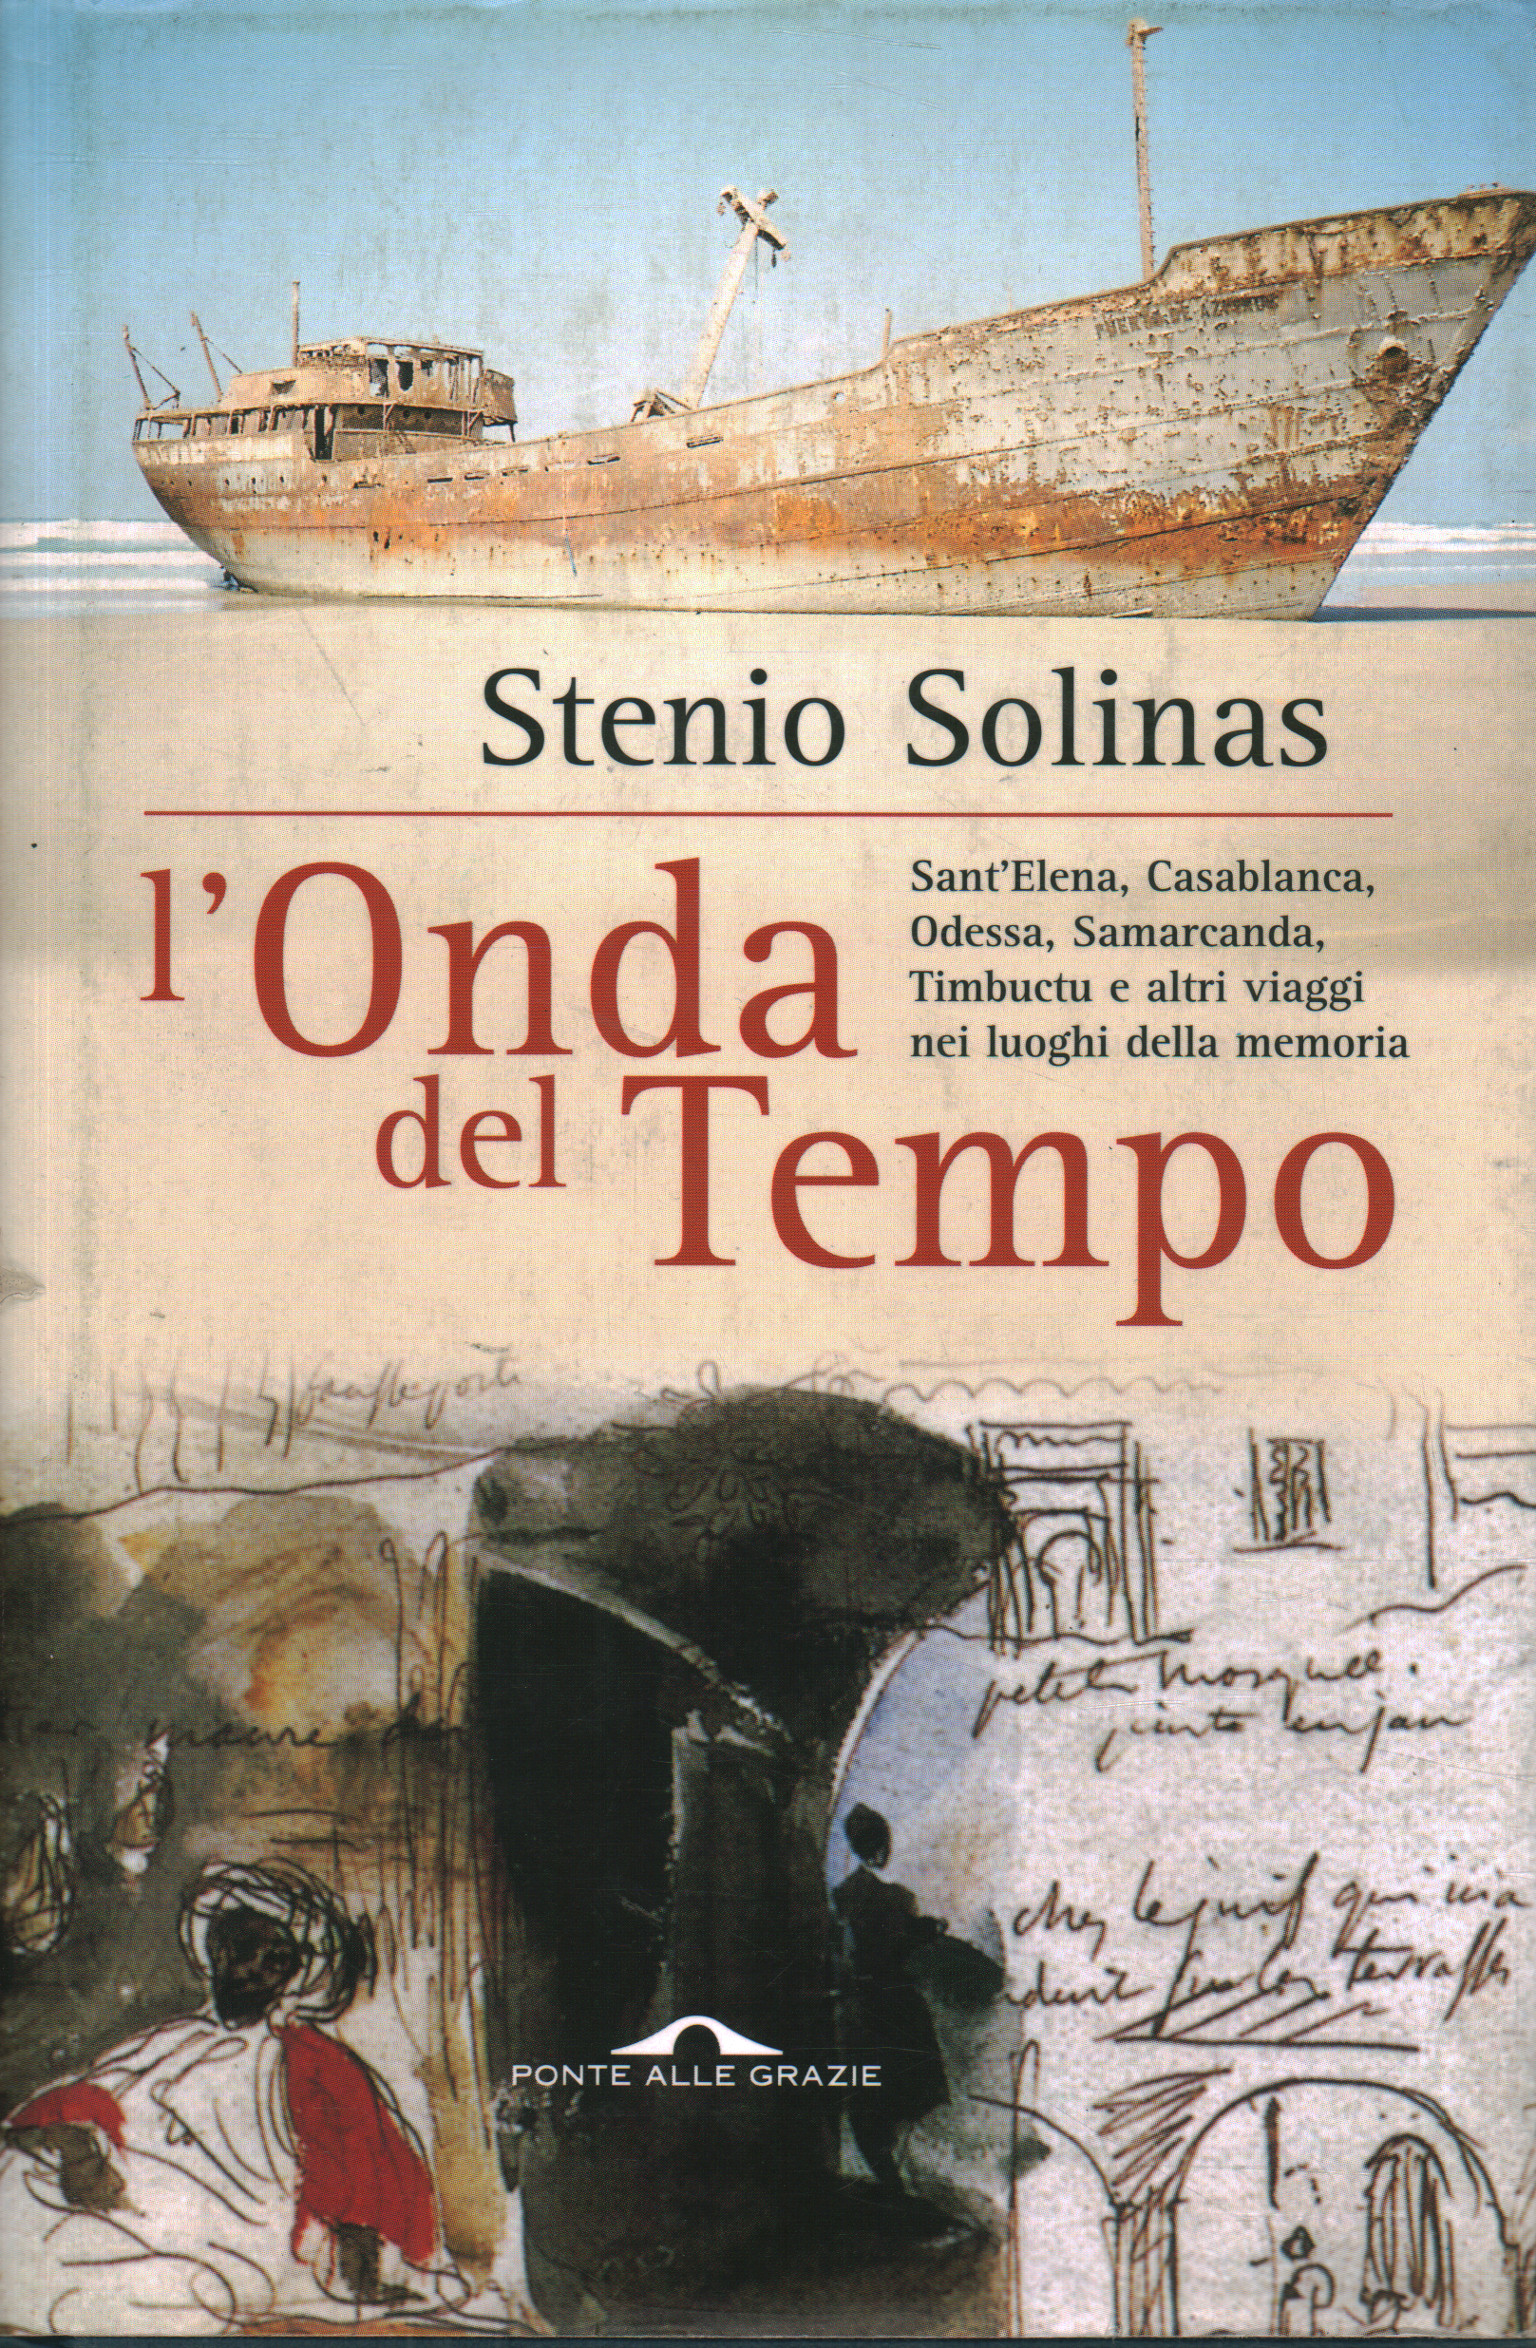 The wave of time, Stenio Solinas